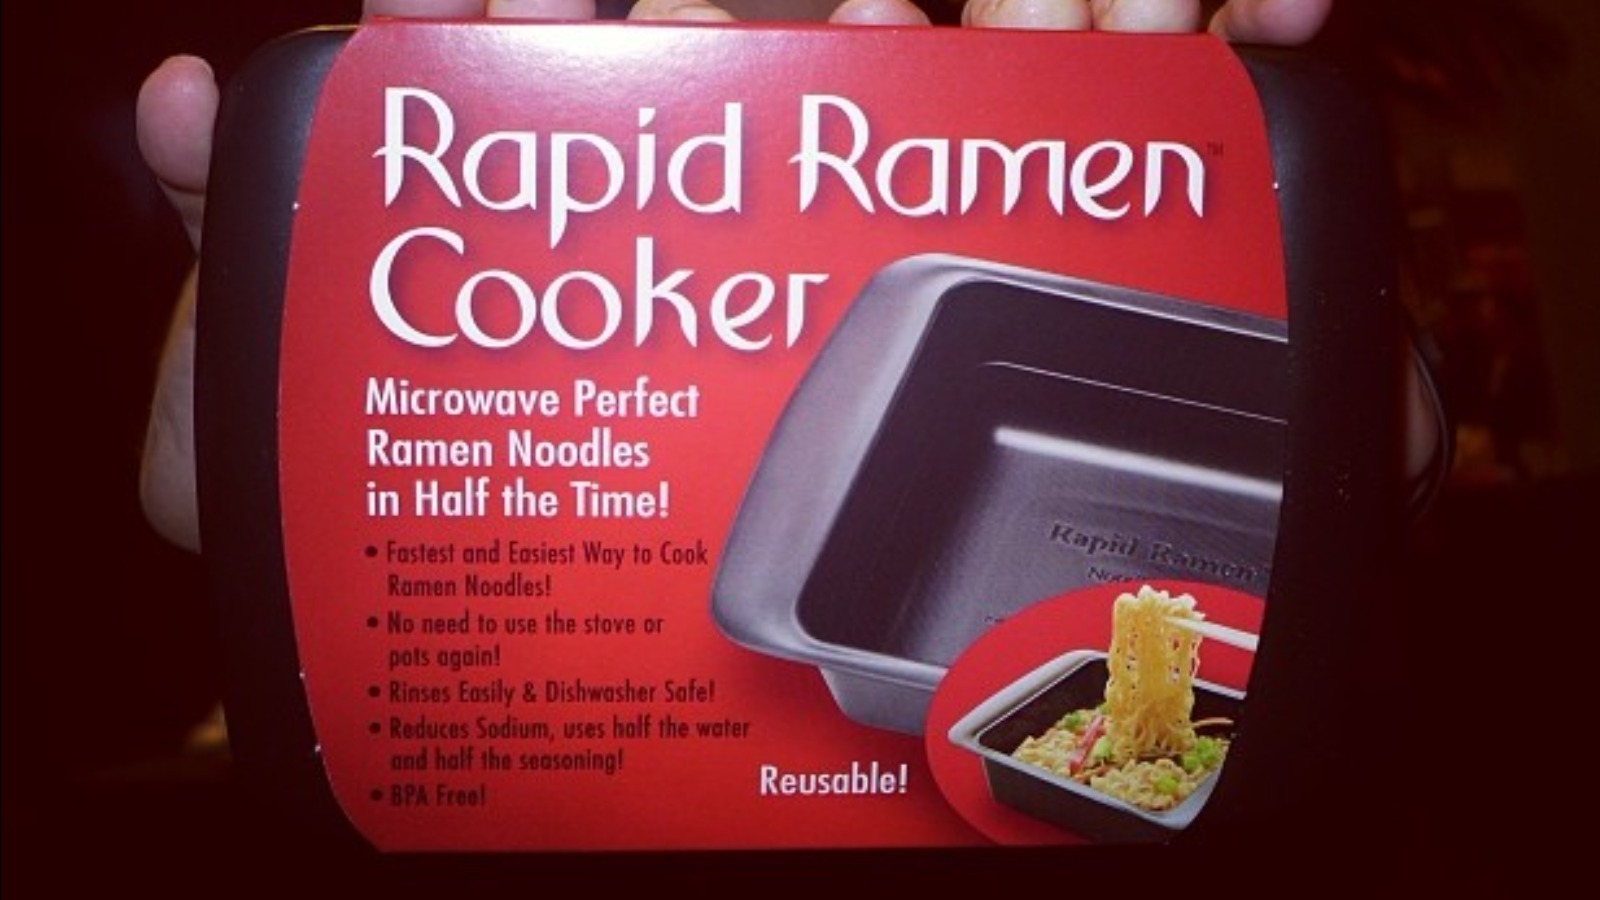 Here's What Happened To Rapid Ramen Cooker After Shark ...